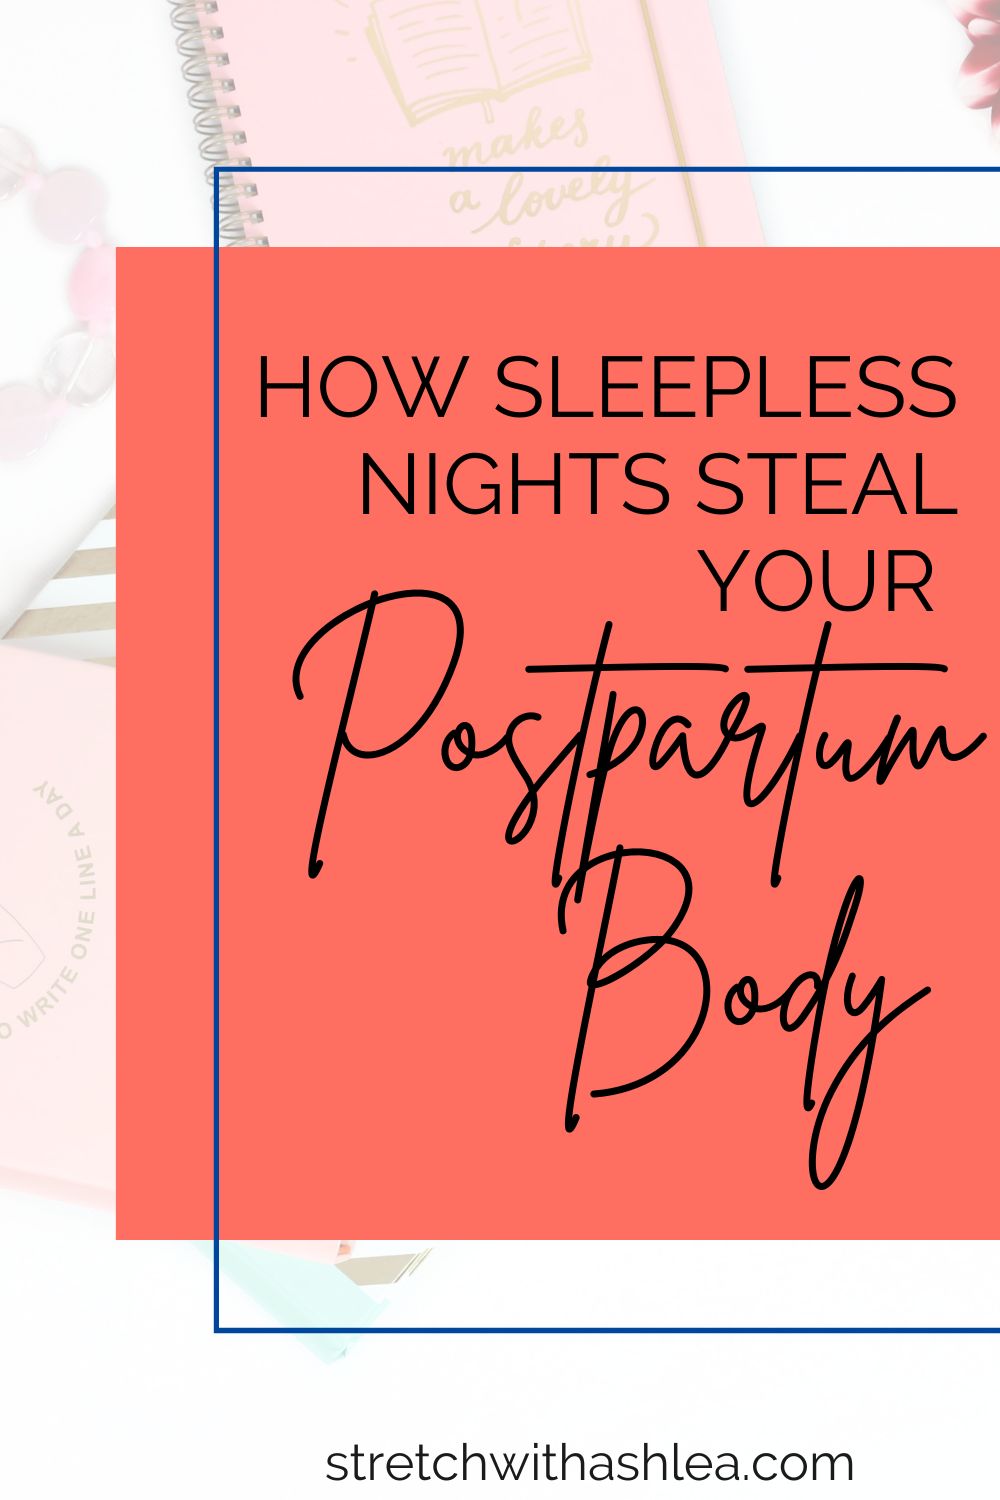 Blog about how sleepless nights steal your postpartum body